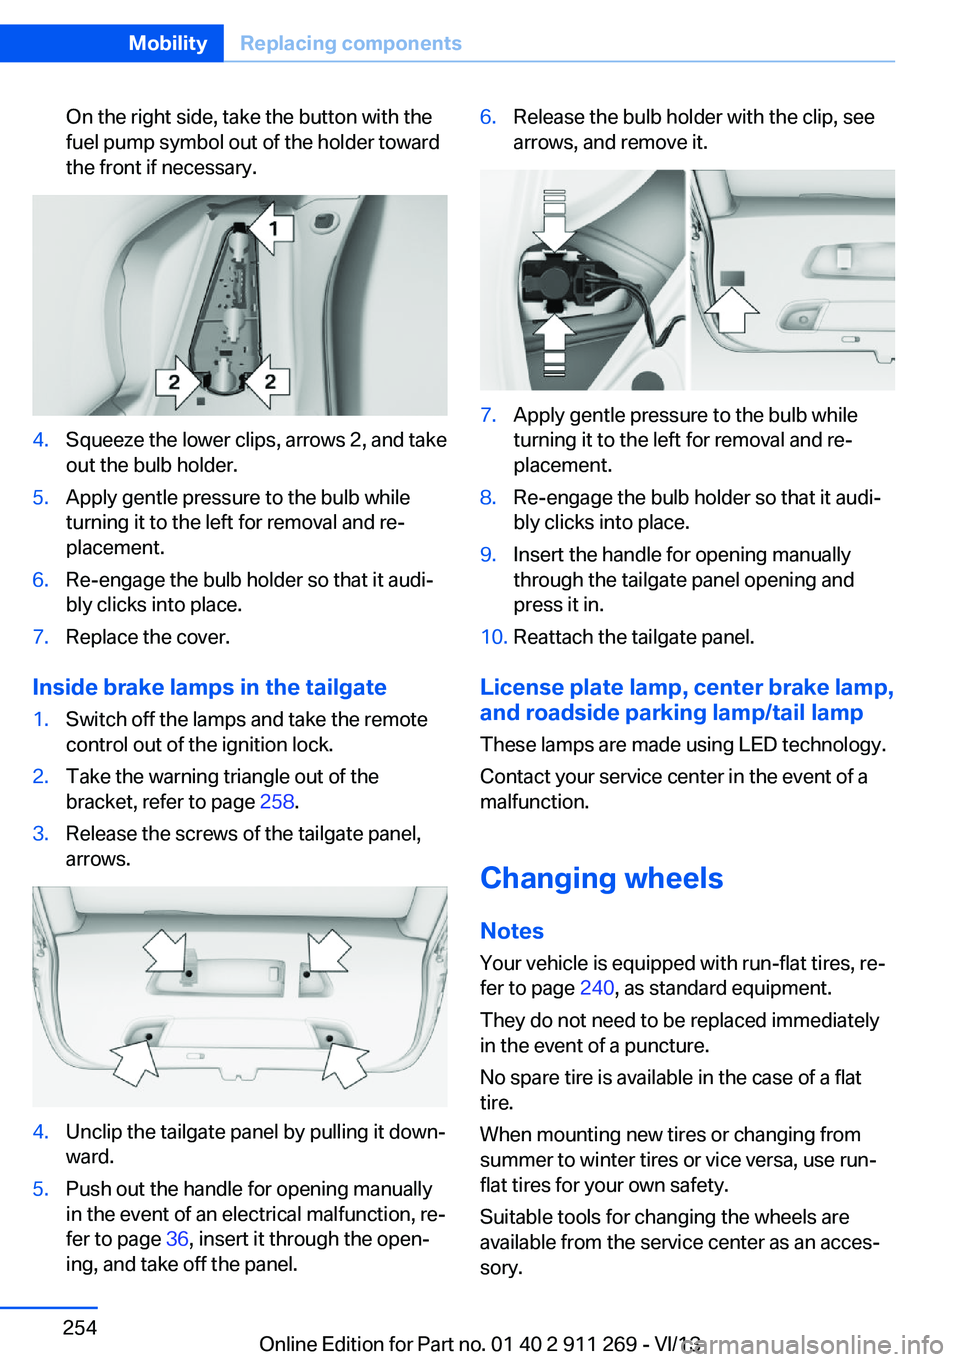 BMW X1 XDRIVE 28I 2014  Owners Manual On the right side, take the button with the
fuel pump symbol out of the holder toward
the front if necessary.4.Squeeze the lower clips, arrows 2, and take
out the bulb holder.5.Apply gentle pressure t